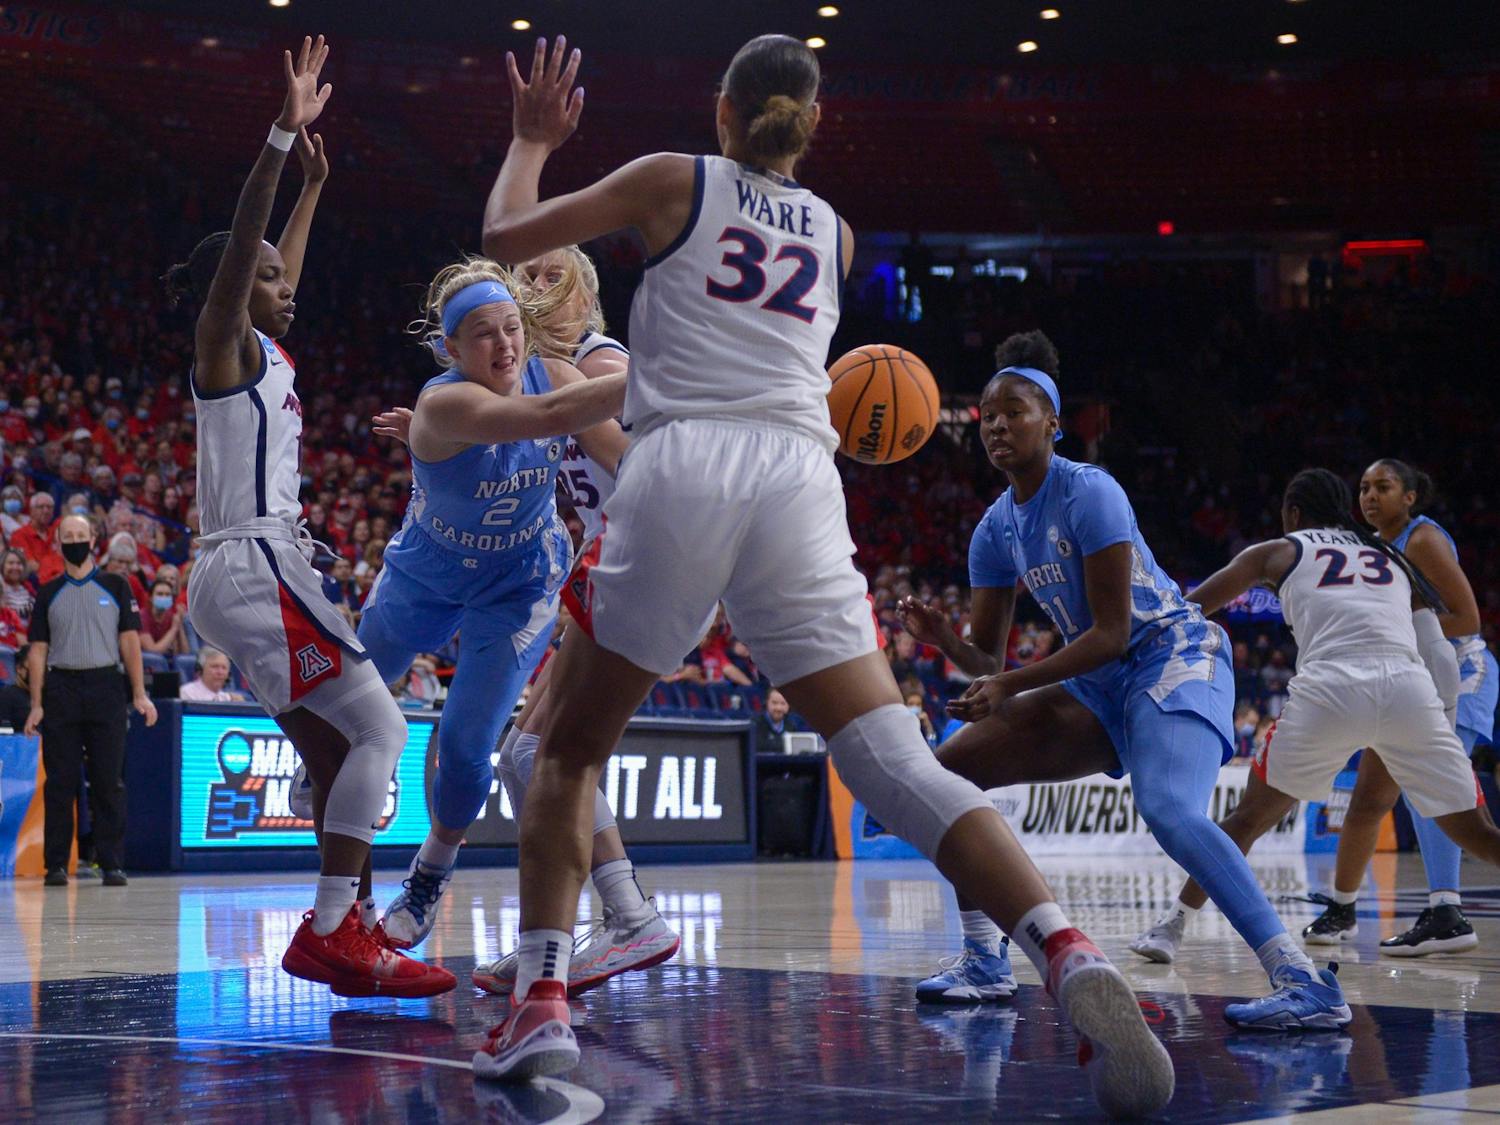 UNC senior Guard Carlie Littfield (2) passes the ball during the second round of the NCAA Tournament against University of Arizona in Tucson, Arizona, on Saturday, March 21, 2022. Carolina won 63-45 to proceed to Sweet 16 round.